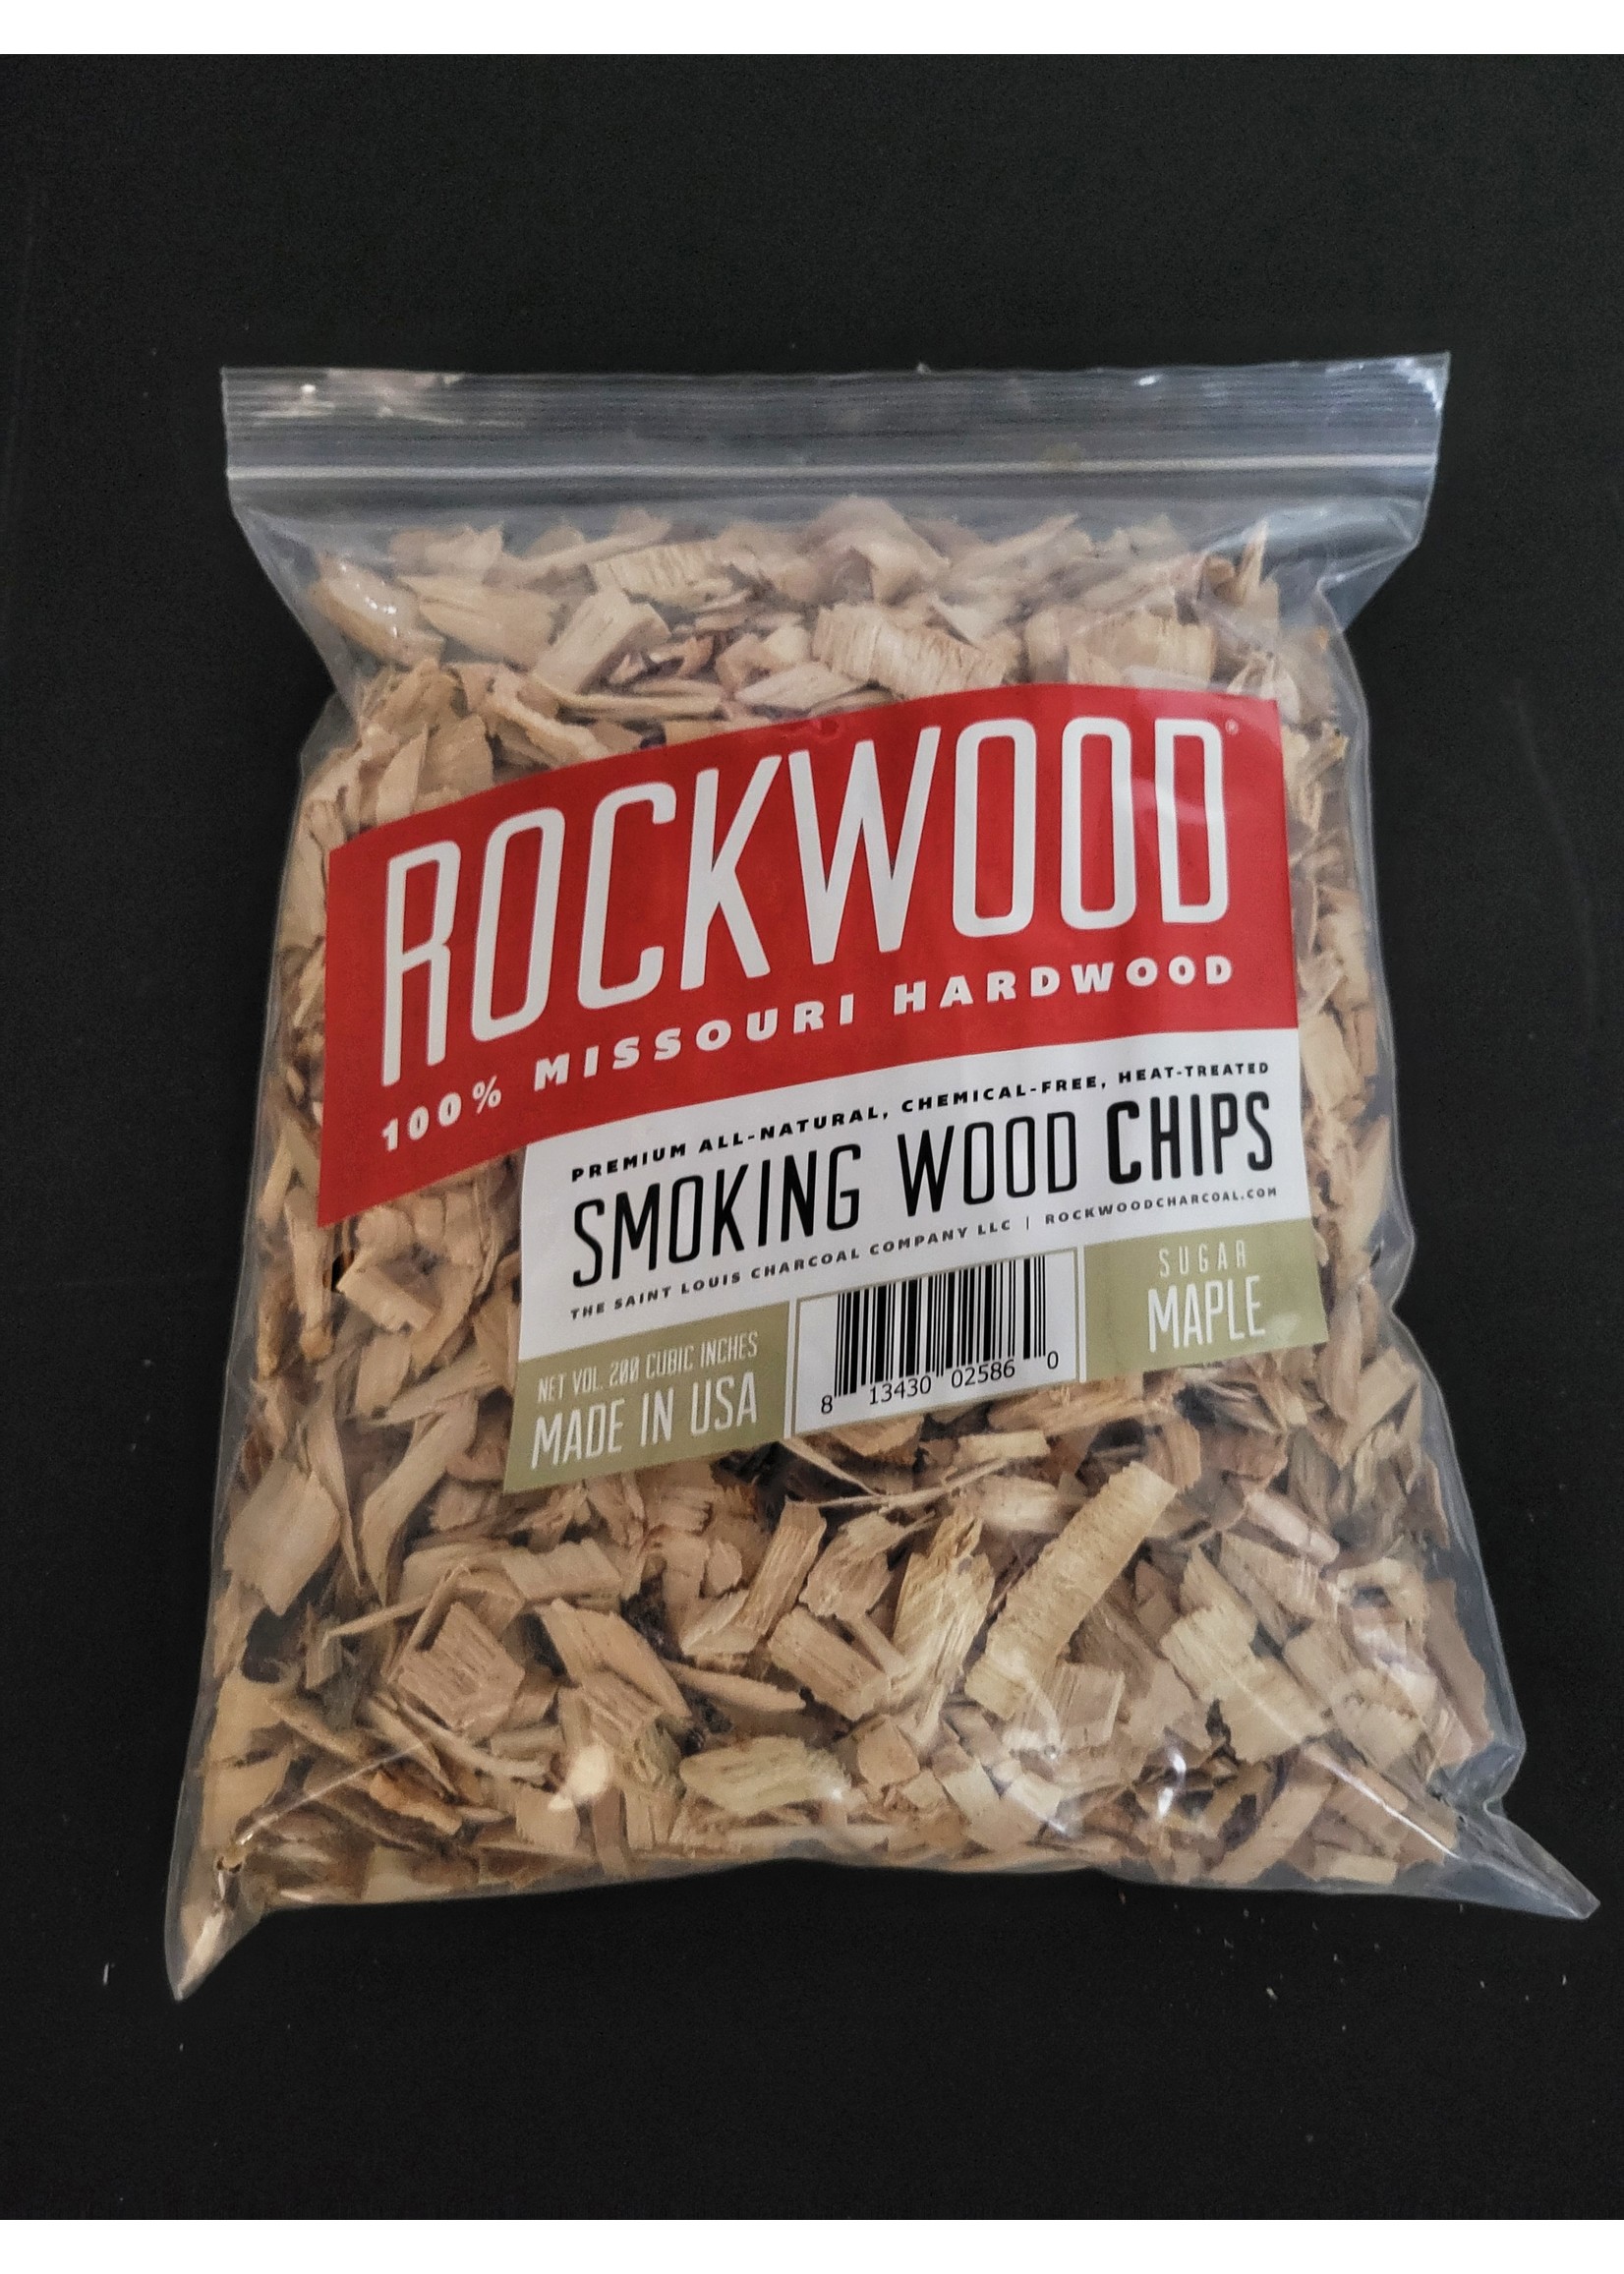 St. Louis Charcoal Rockwood Smoking Chips